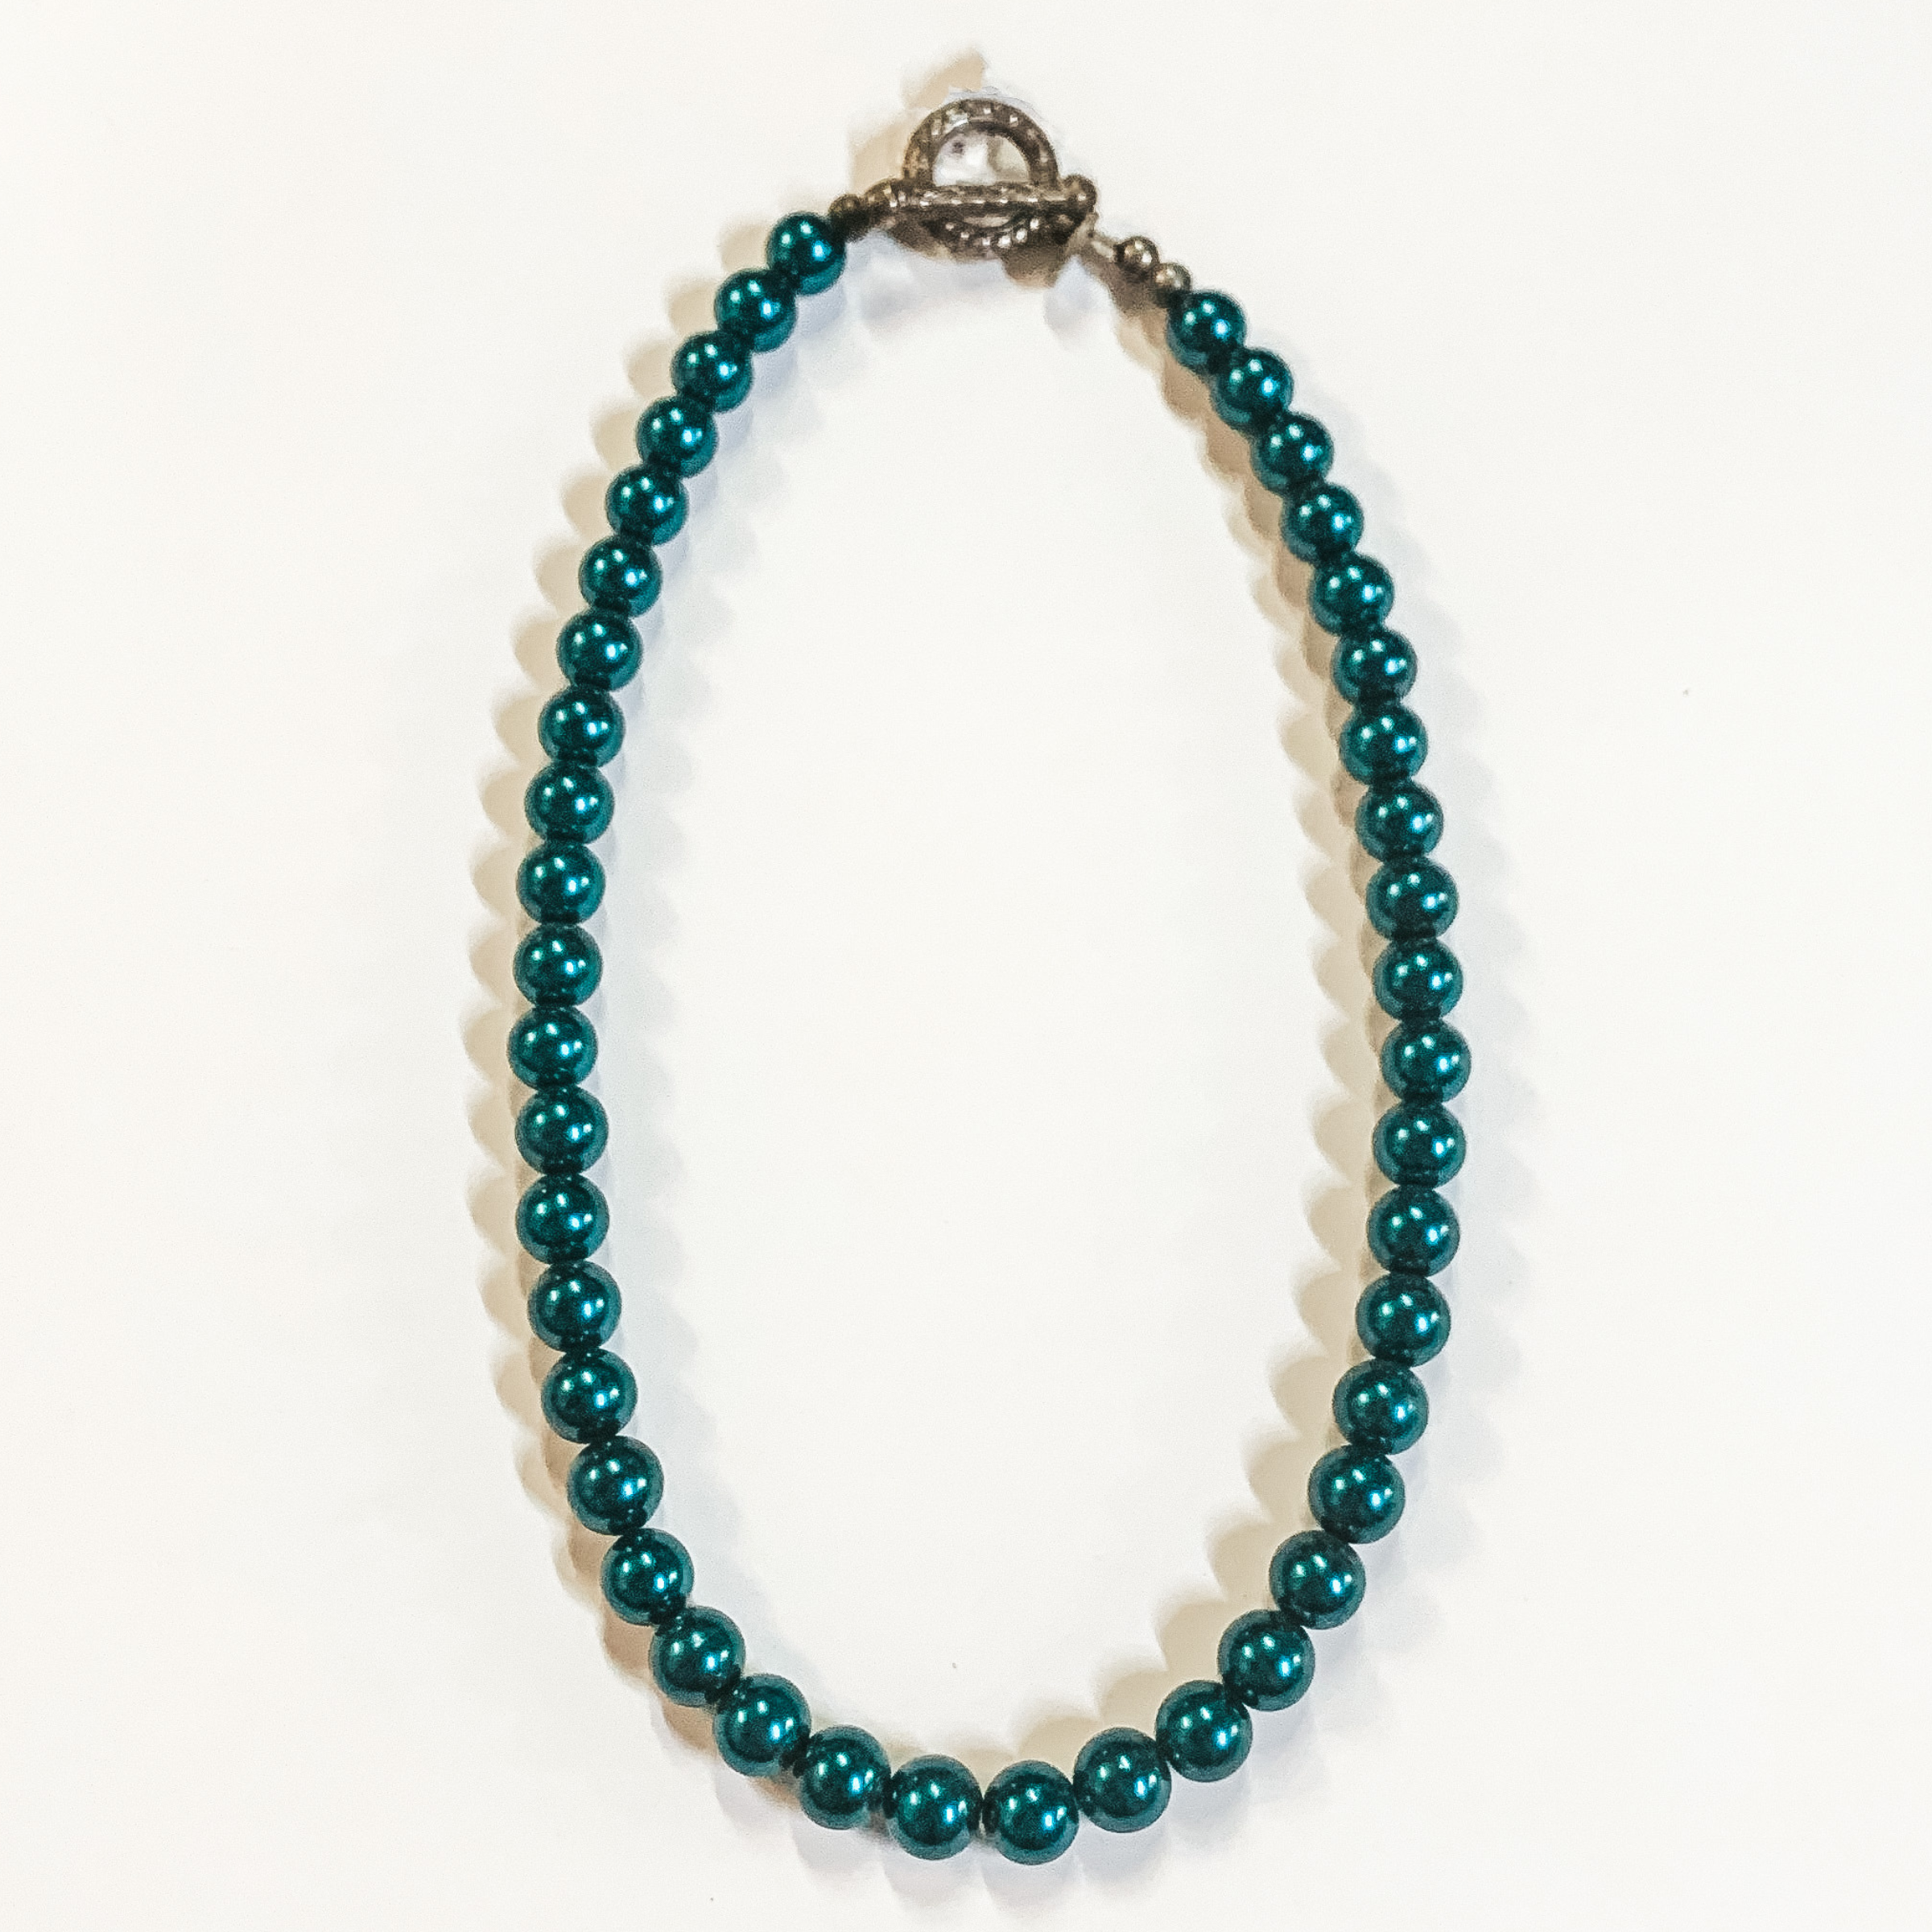 GUG Handmade Pearl Beaded Necklaces in Green and Teal - Giddy Up Glamour Boutique